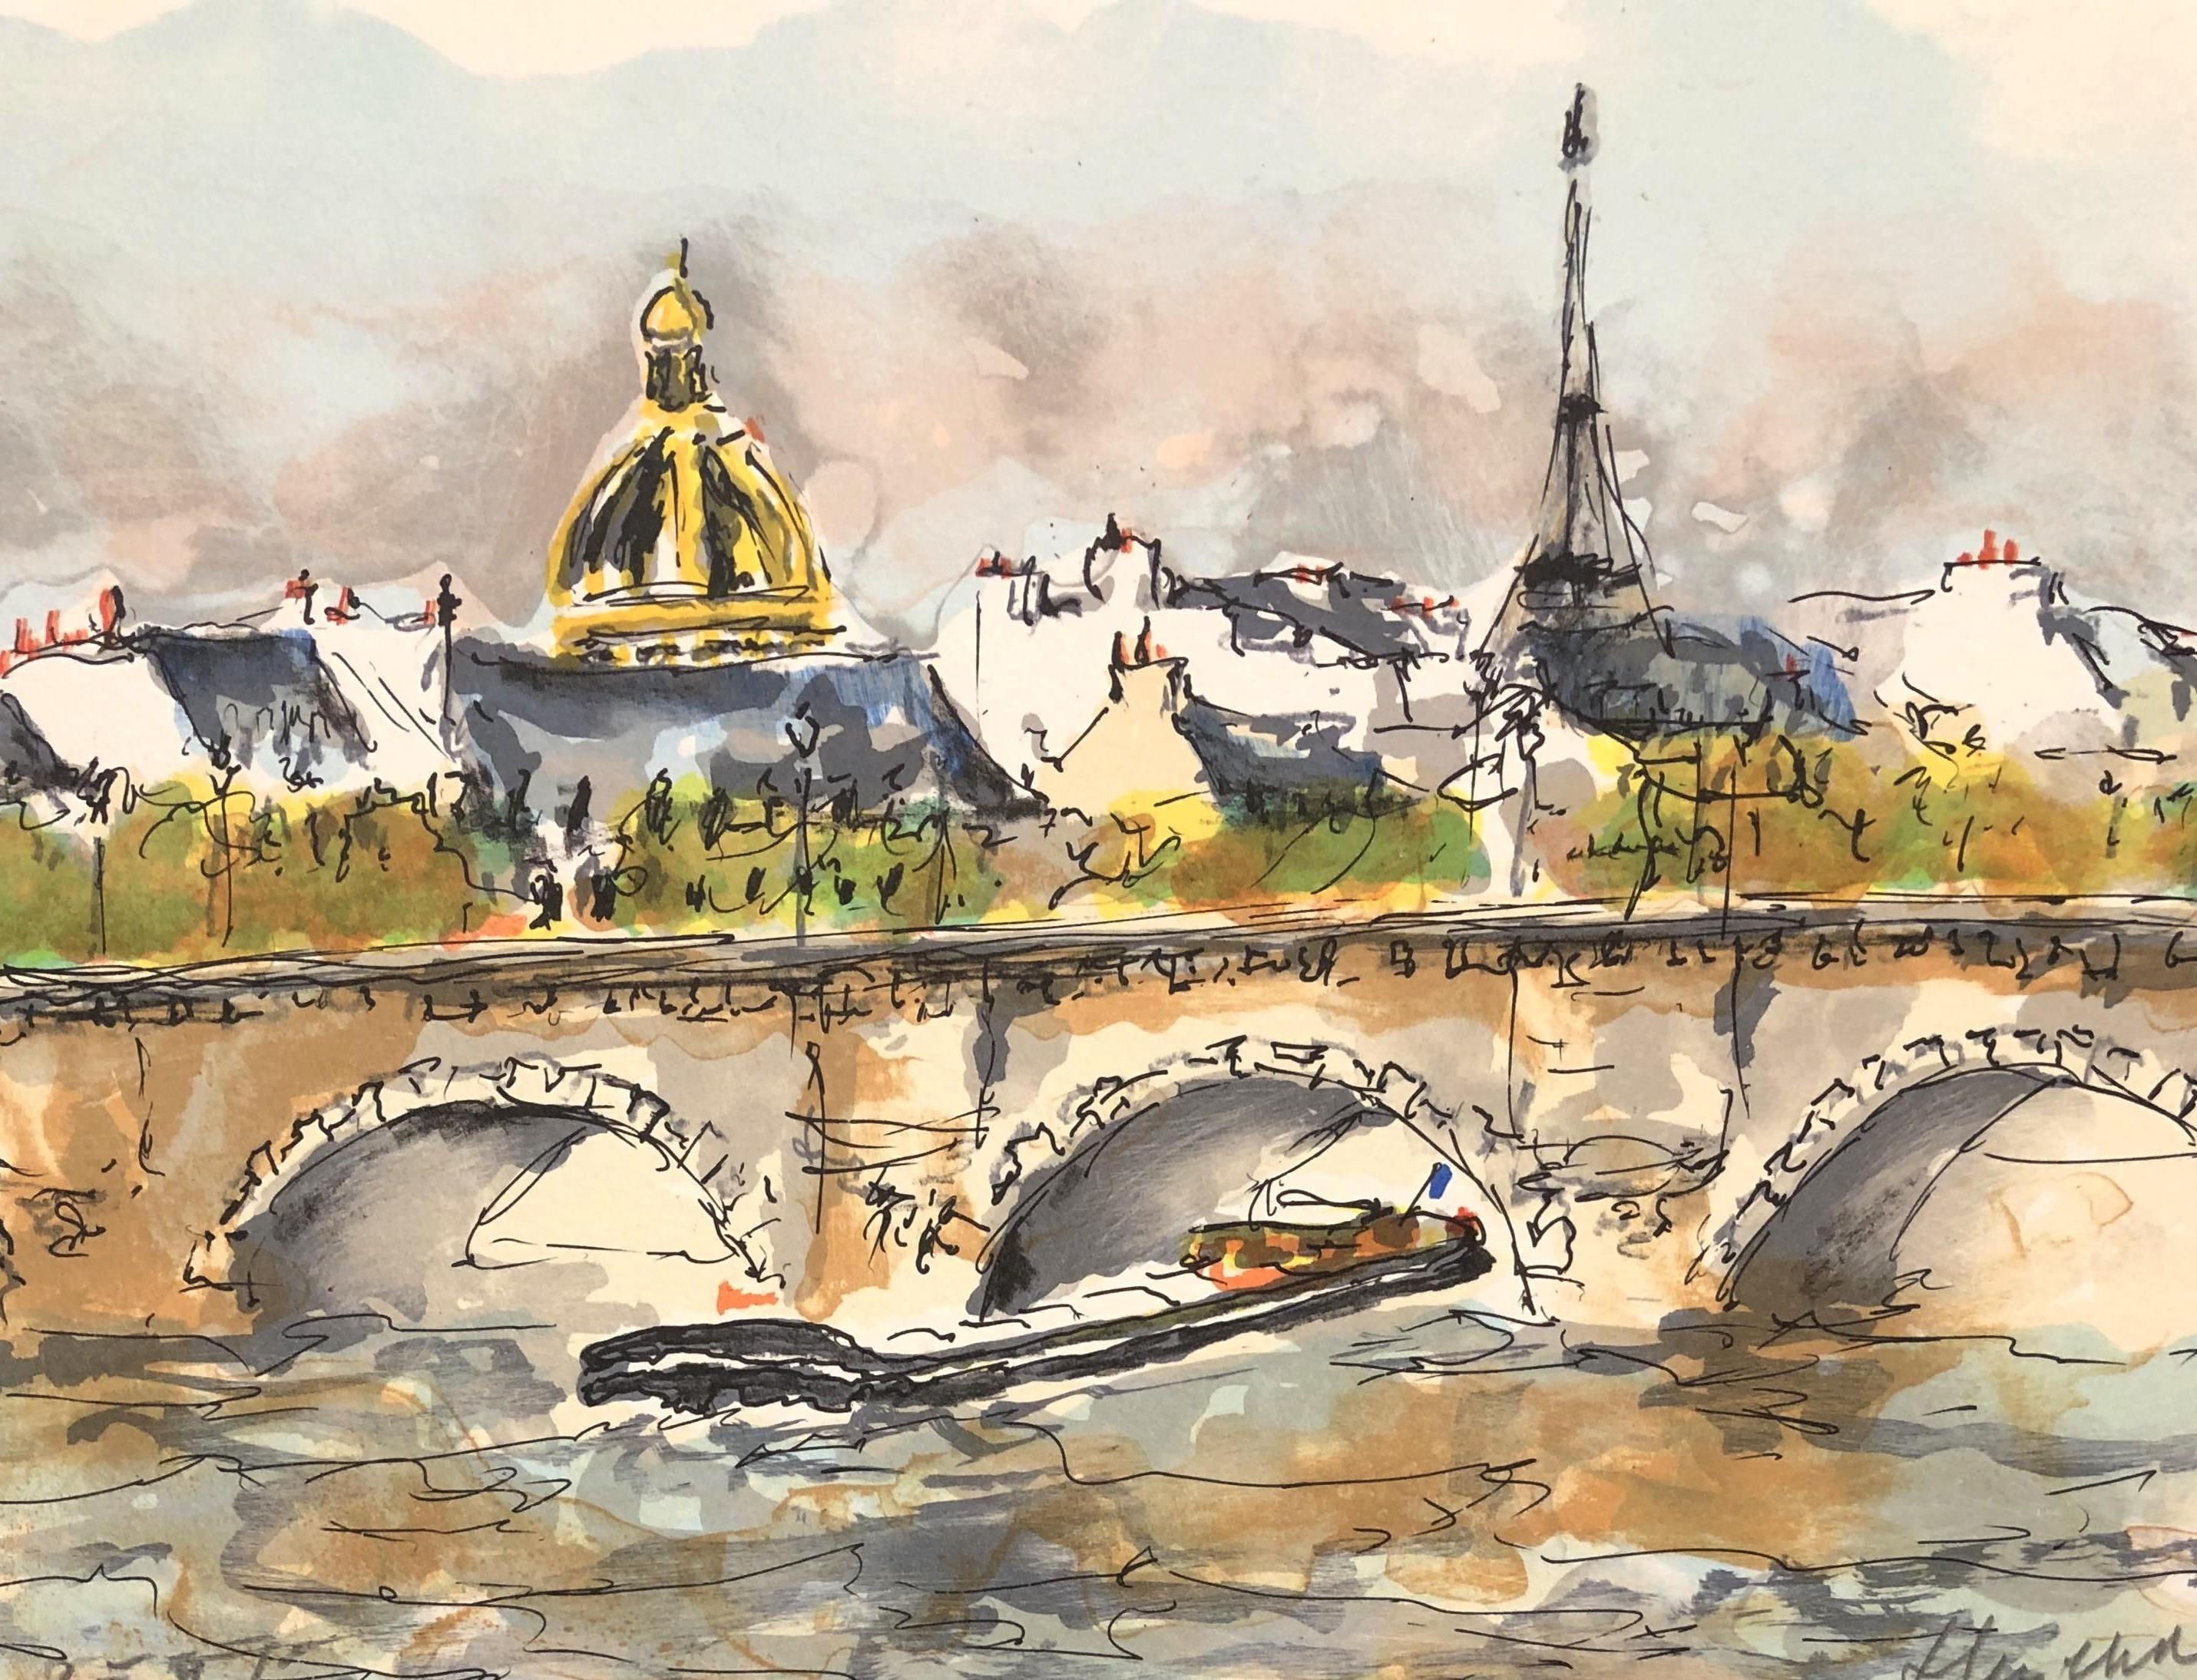 Paris : Seine and Eiffel Tower - Original Lithograph, Handsigned and numbered - Print by Urbain Huchet